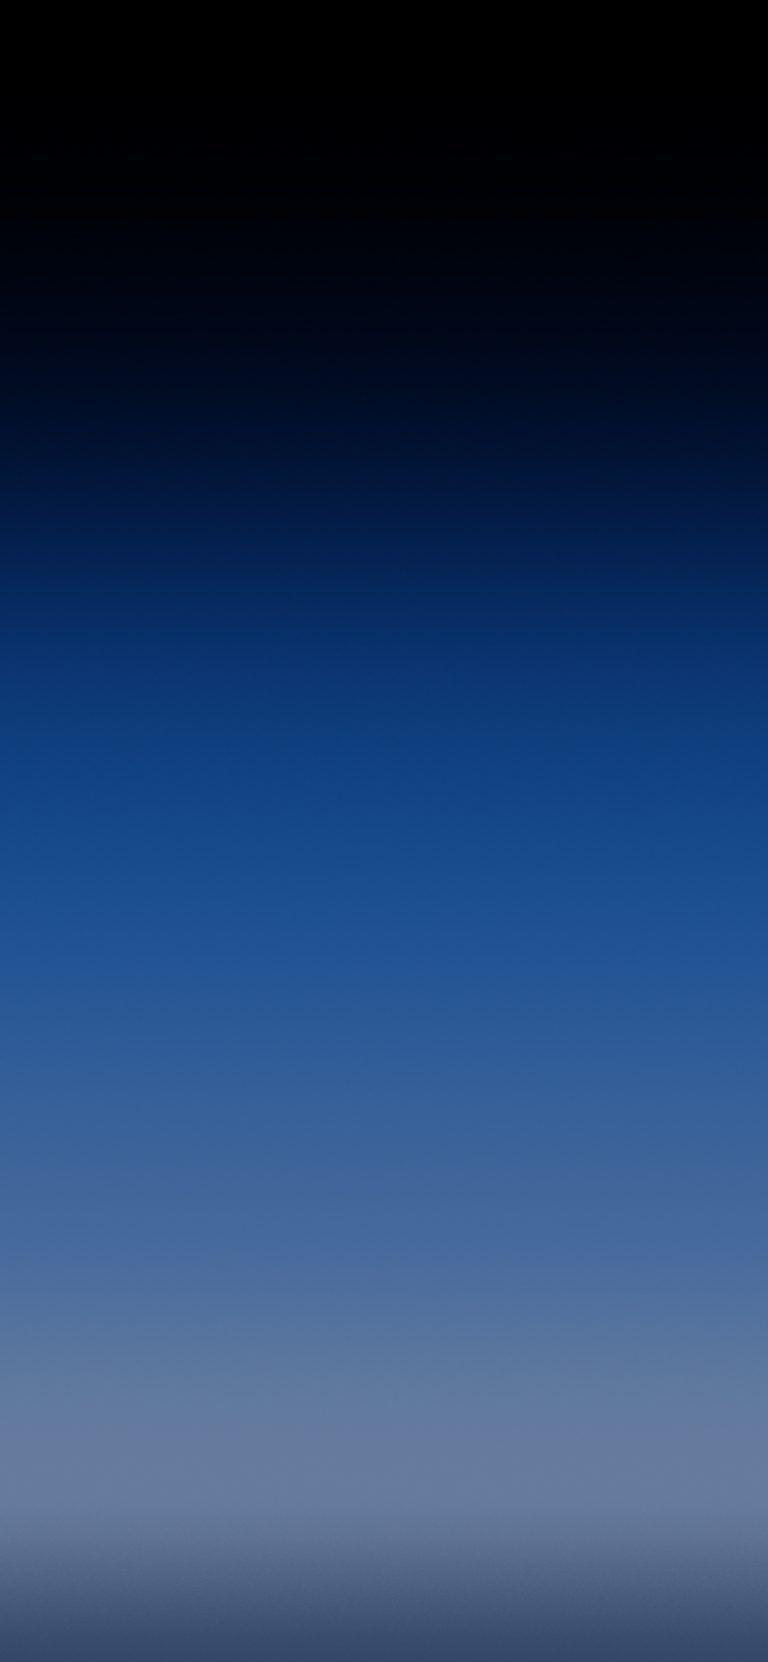 Minimal Gradient Wallpaper To Hide The iPhone X Notch Ombre